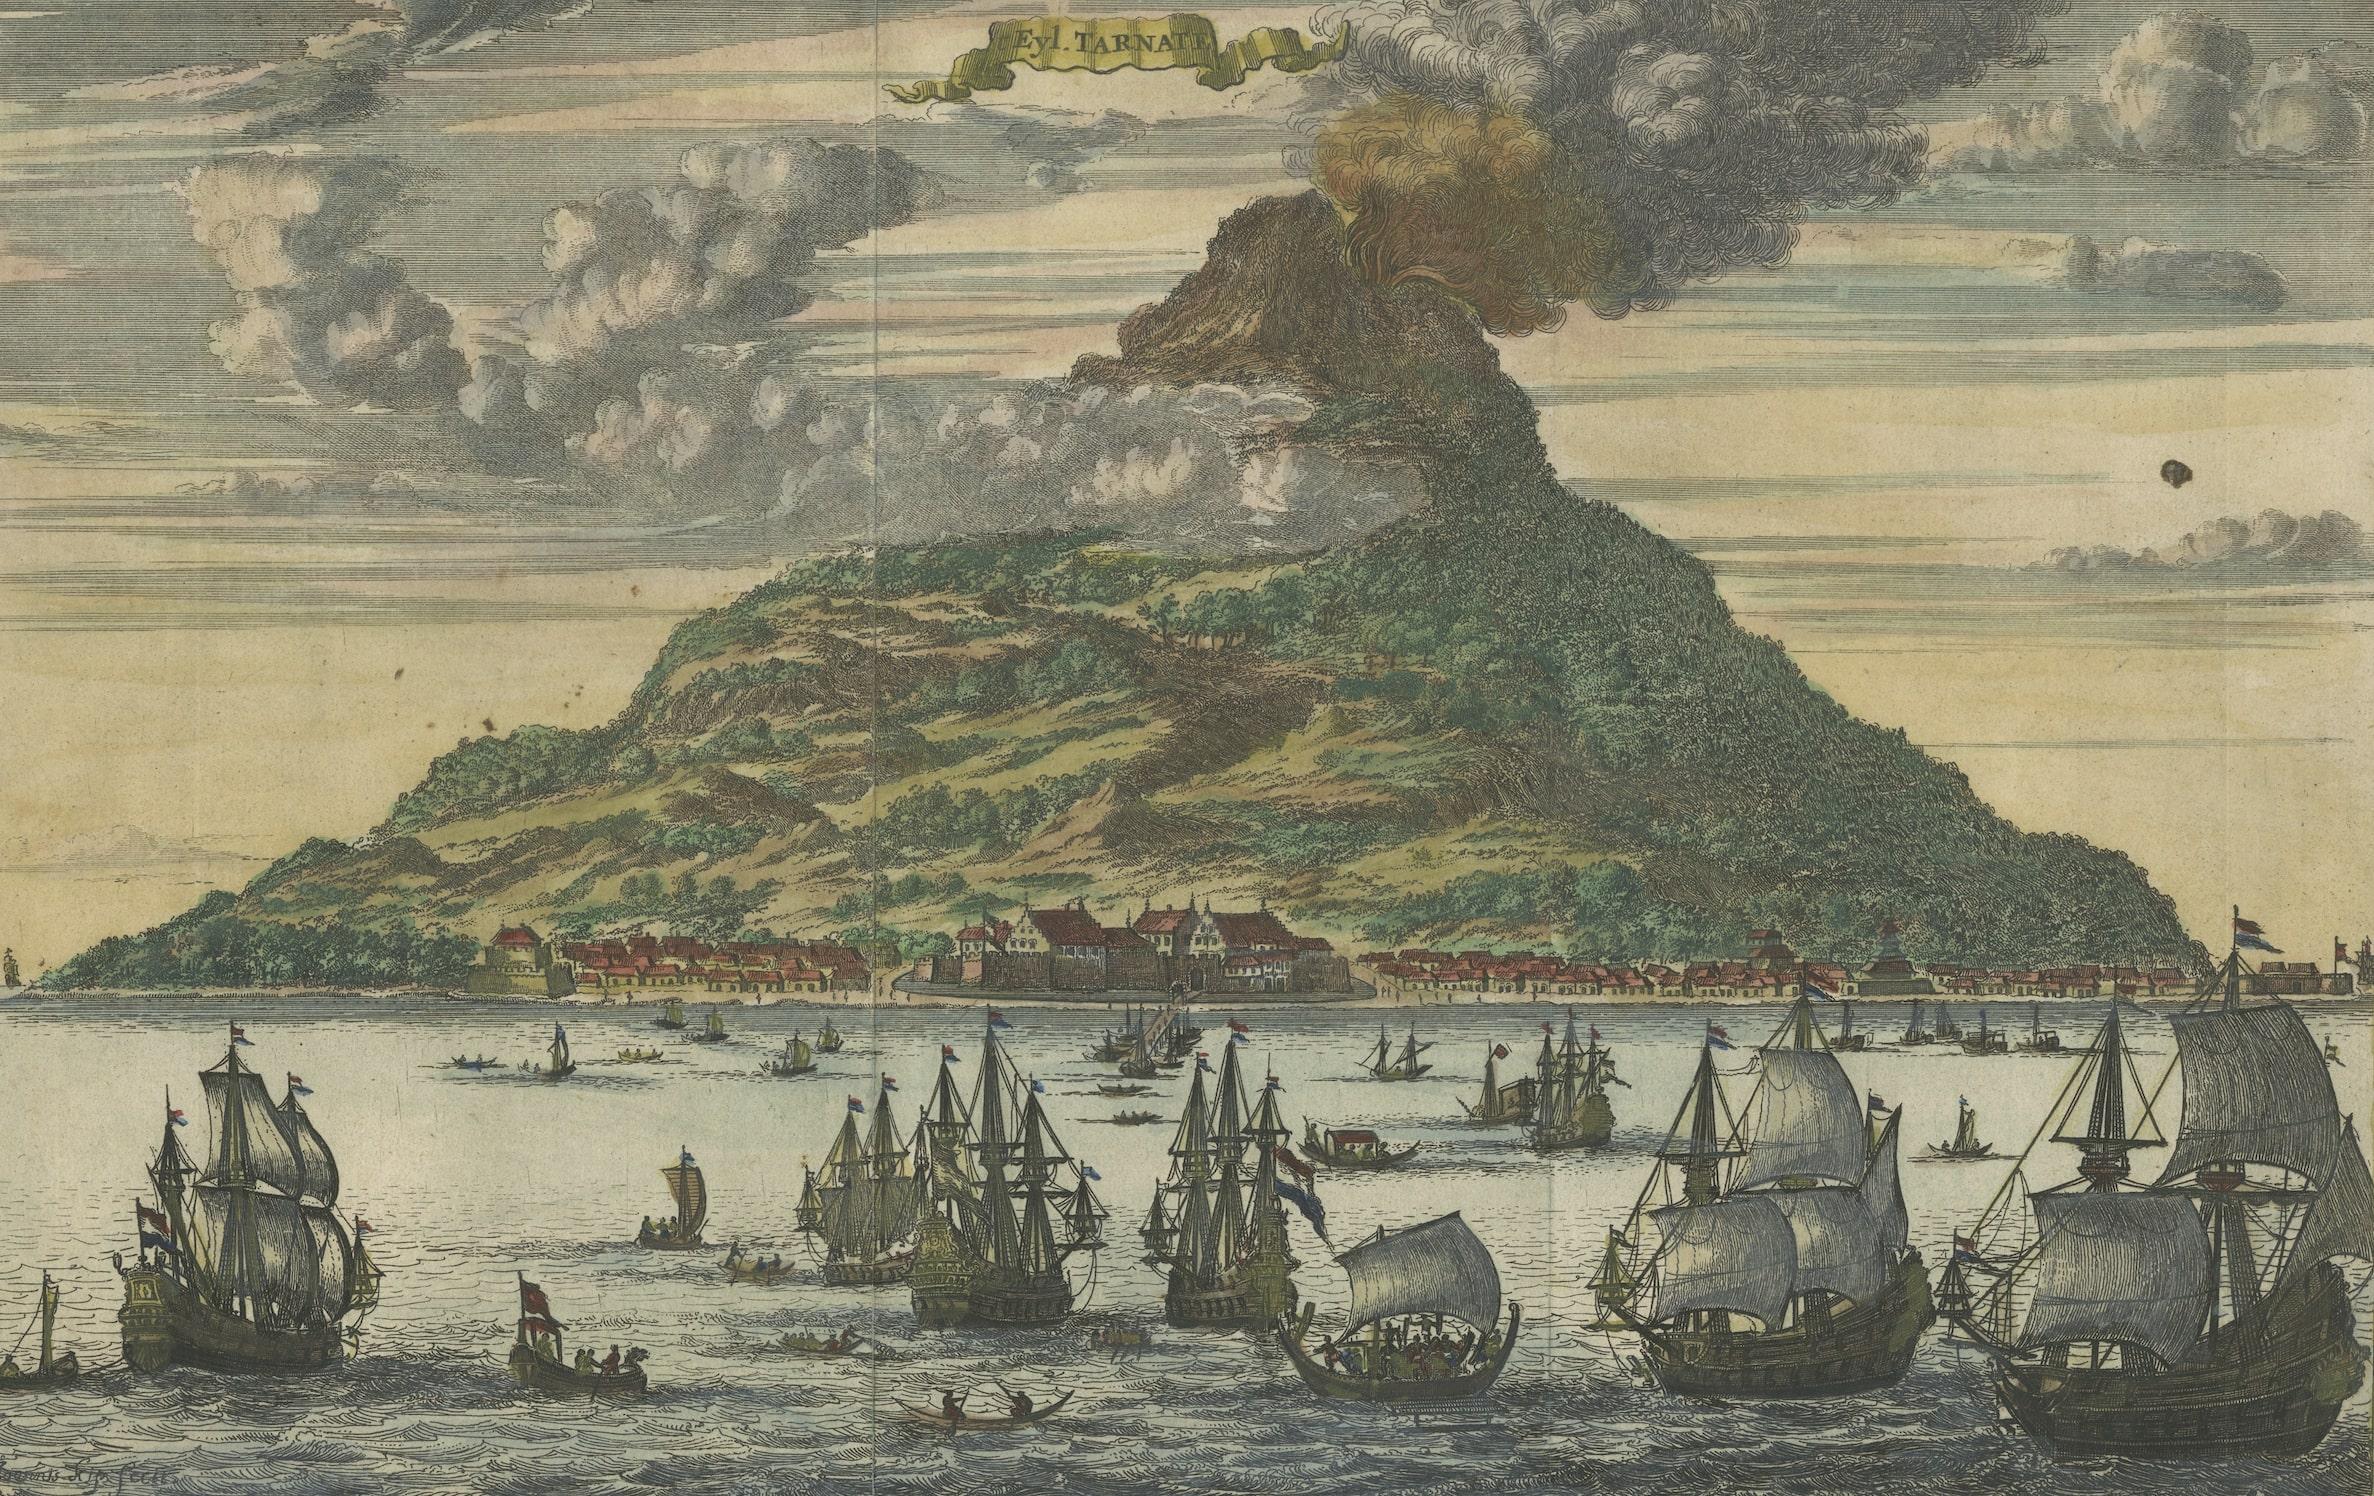 Engraved Volcanic Island of Ternate with VOC Ships in The Dutch East Indies, 1682